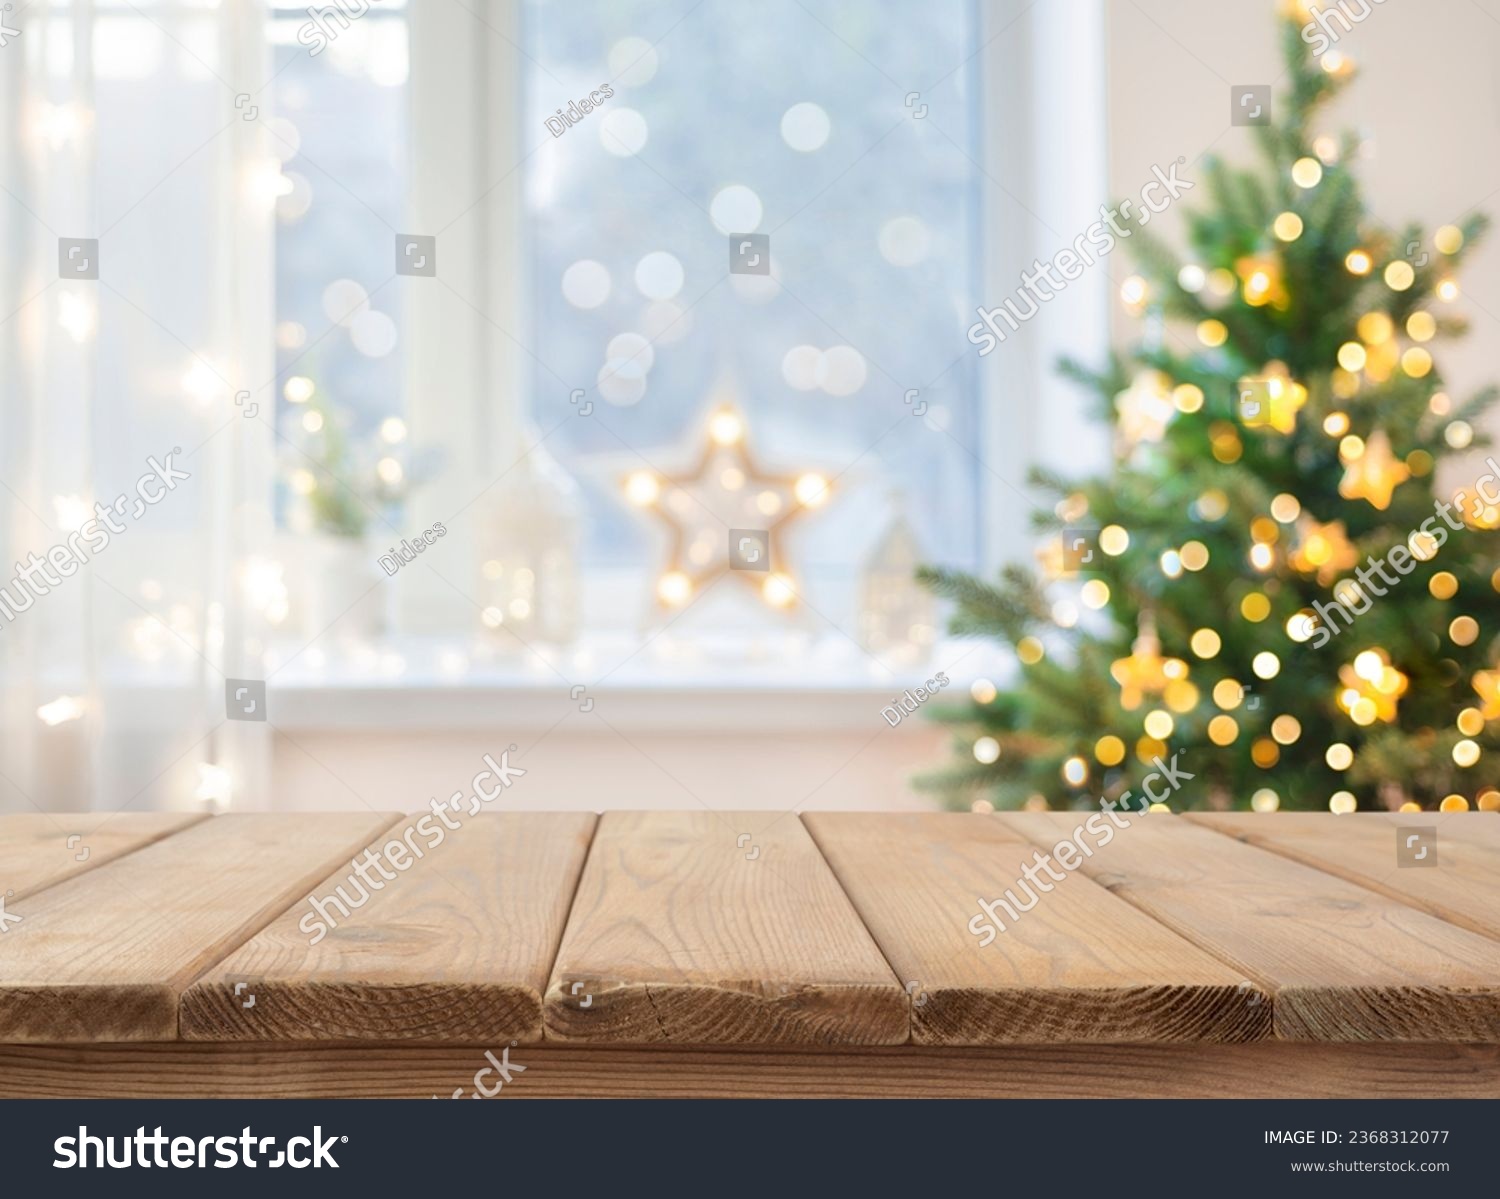 Empty table in front of christmas tree with decoration background #2368312077